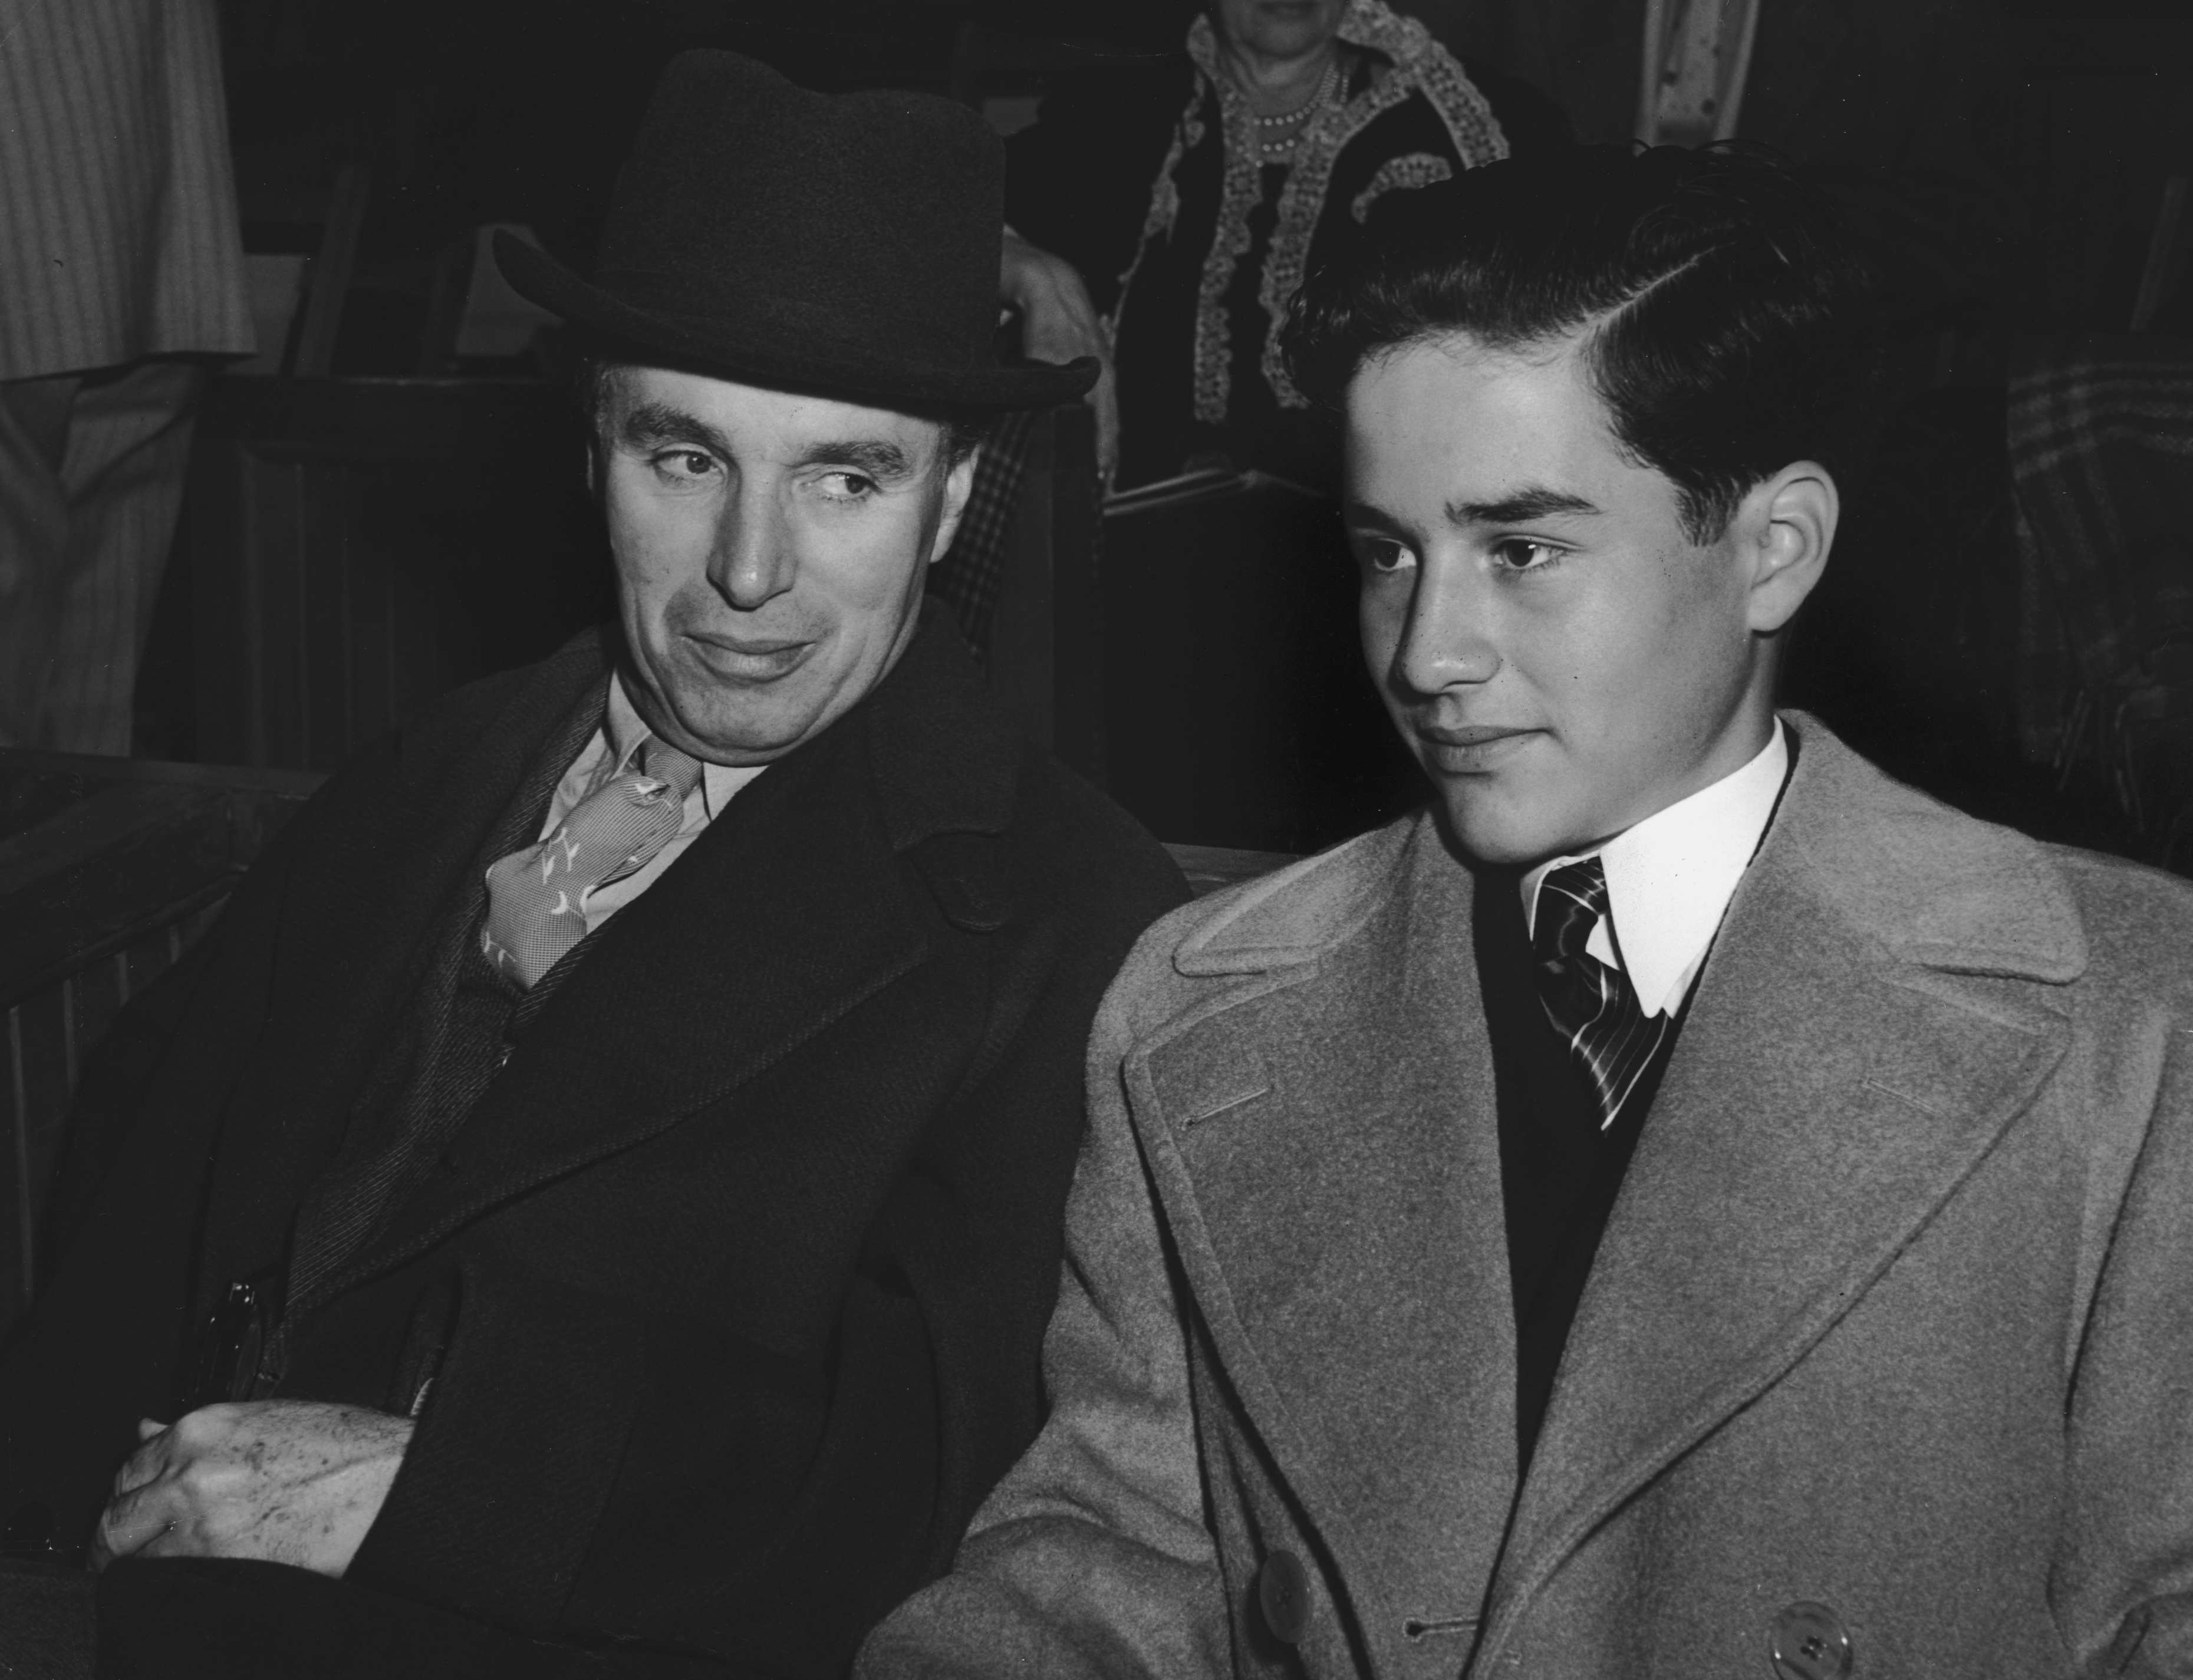 Charlie Chaplin seated in a stadium next to his son, Charles Jr., circa 1940 | Source: Getty Images